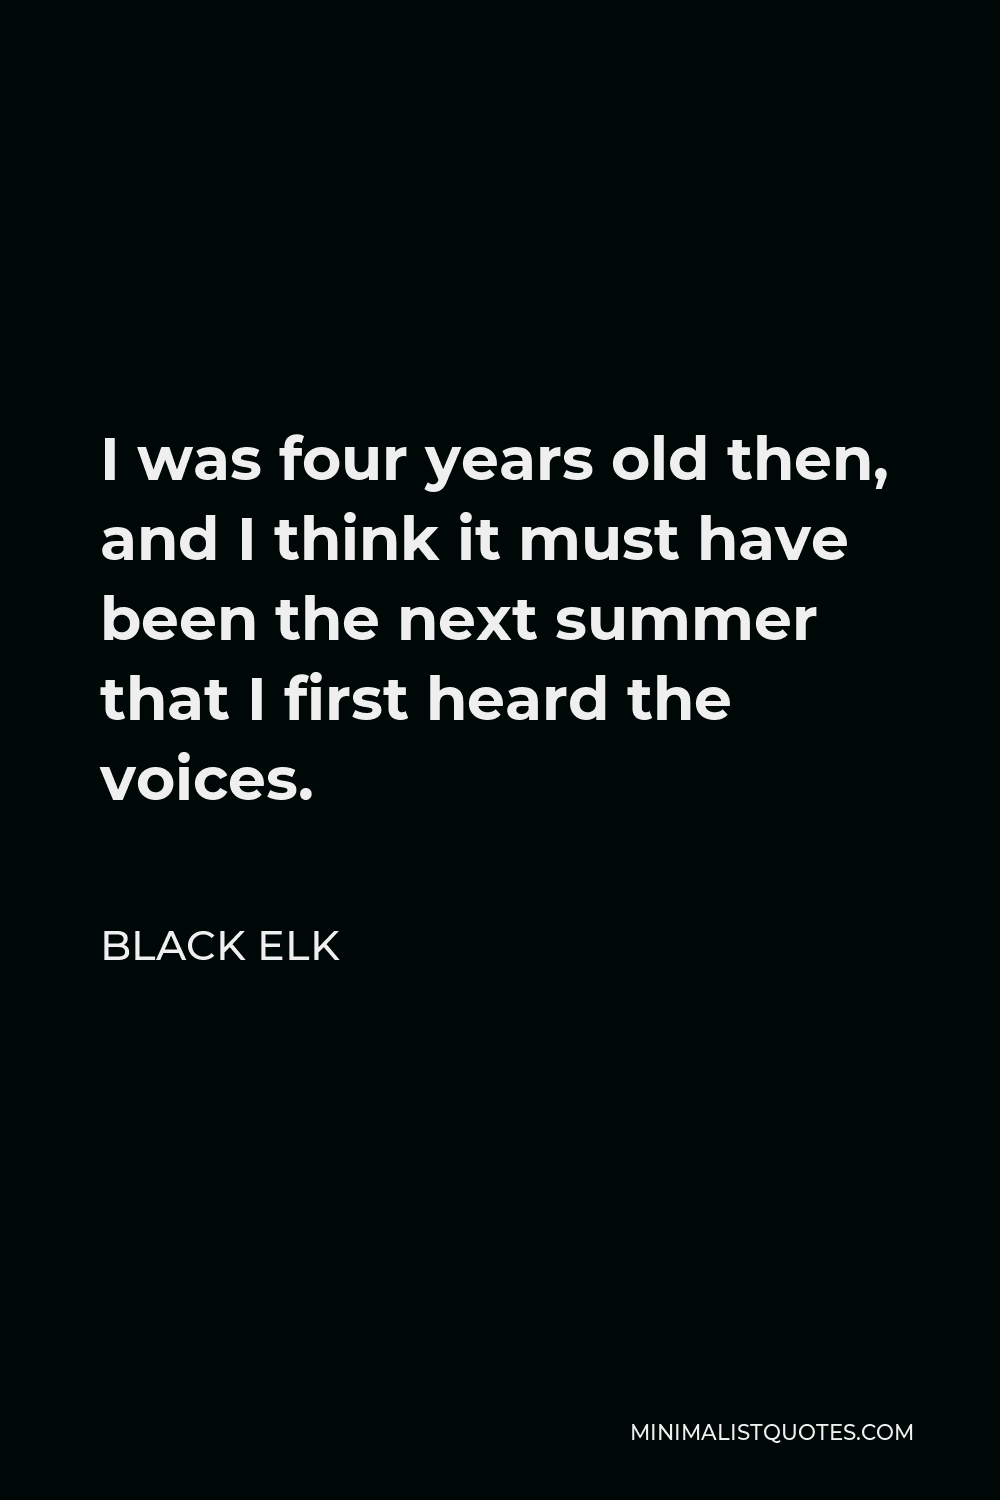 Black Elk Quote - I was four years old then, and I think it must have been the next summer that I first heard the voices.